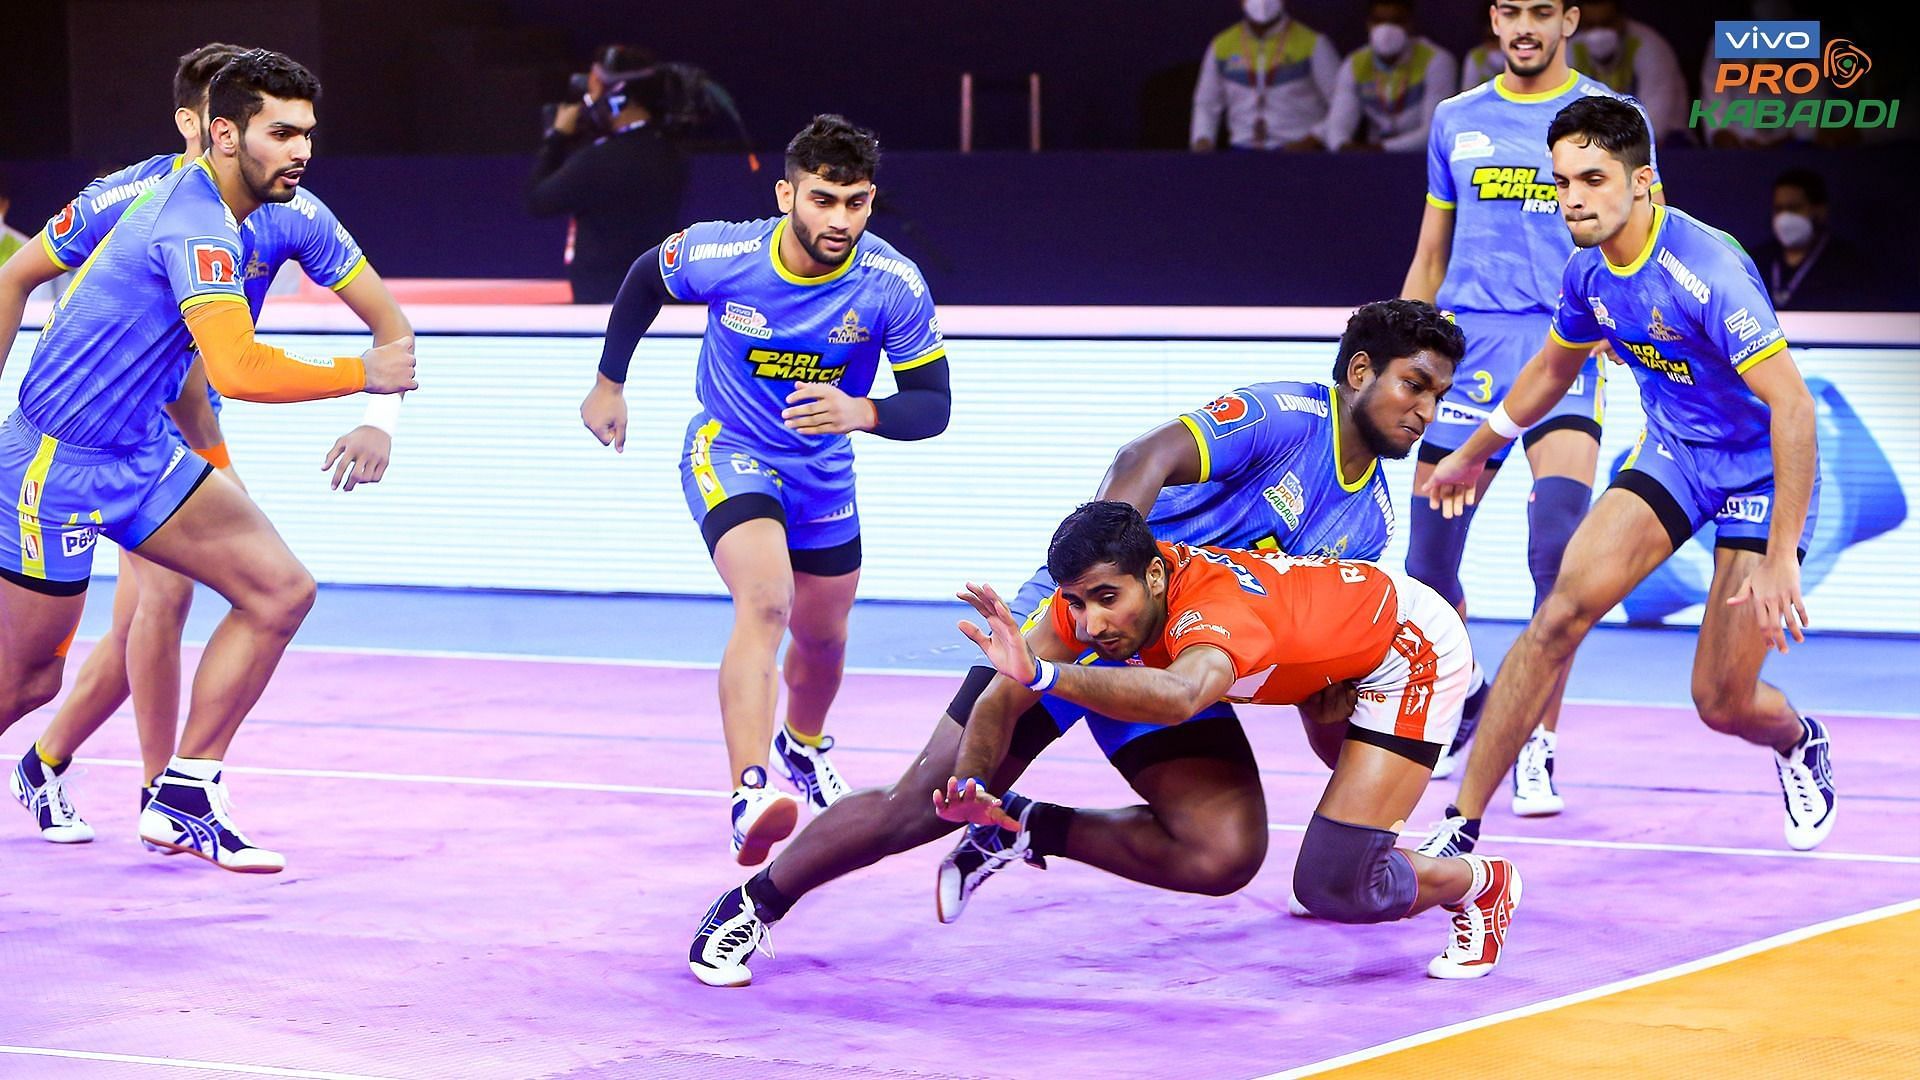 Gujarat Giants are a win away from qualifying for the Pro Kabaddi playoffs (Image Courtesy: Pro Kabaddi/Facebook)